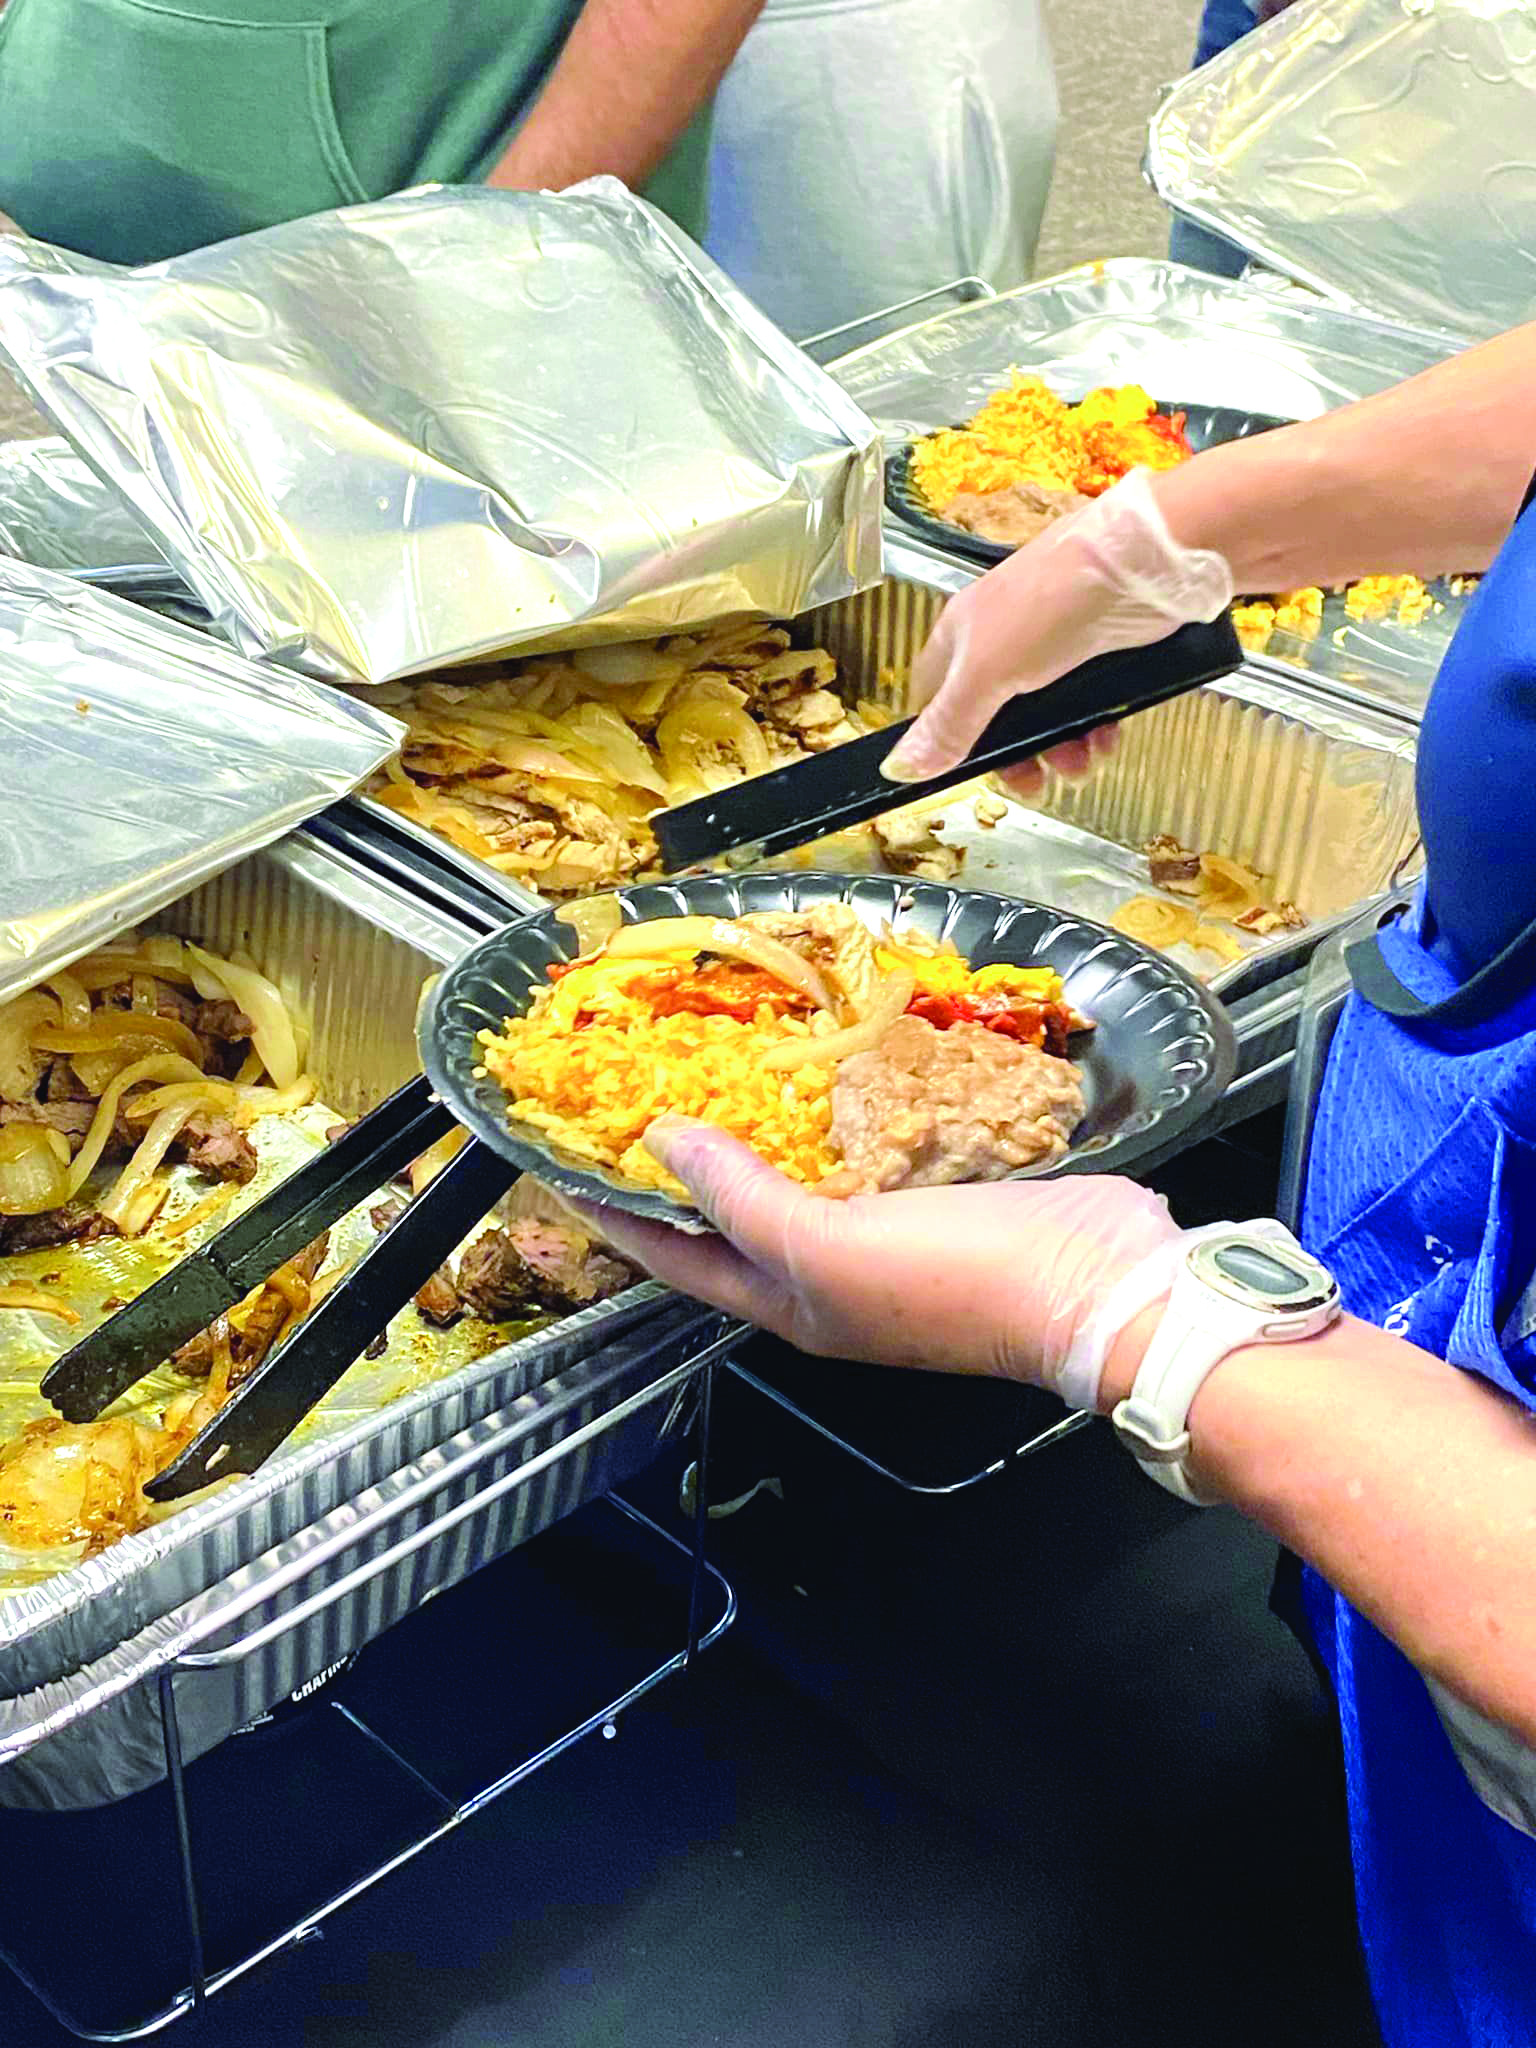 Catholic Charities hosts New Year’s luncheon for migrants